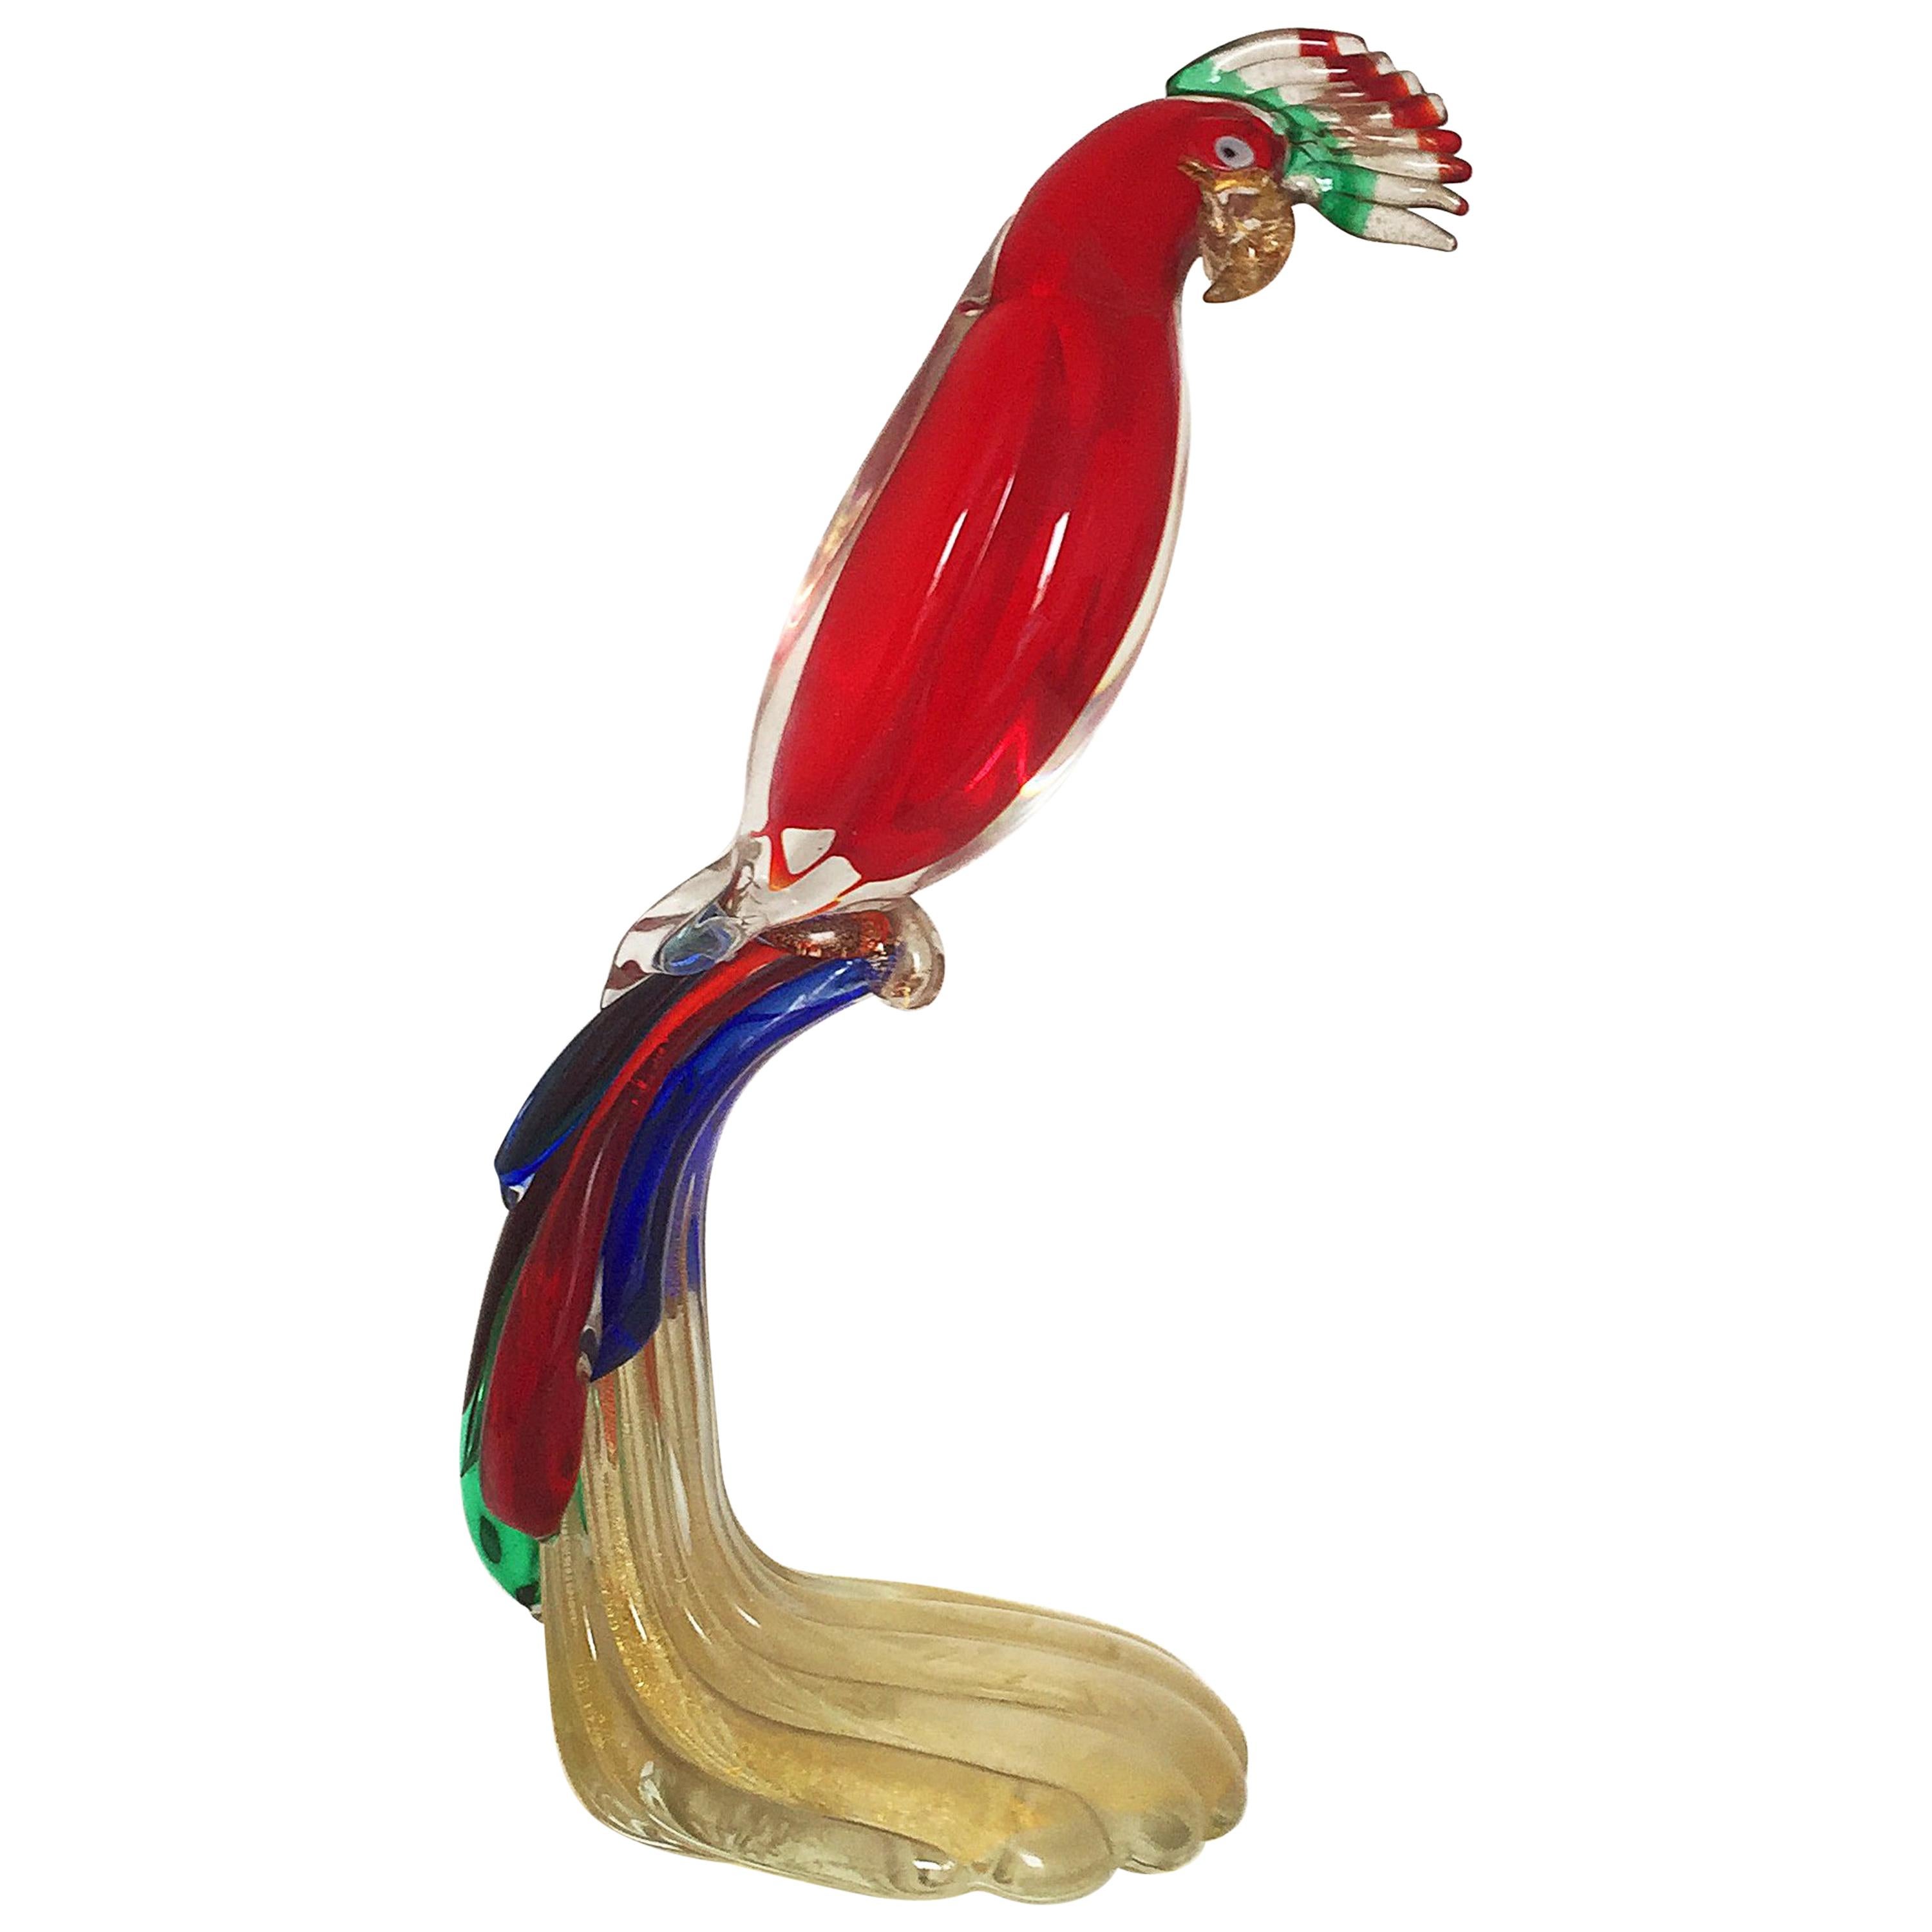 Large Gambaro & Poggi Murano Glass Parrot in Red, Blue, Green and Gold Flakes For Sale